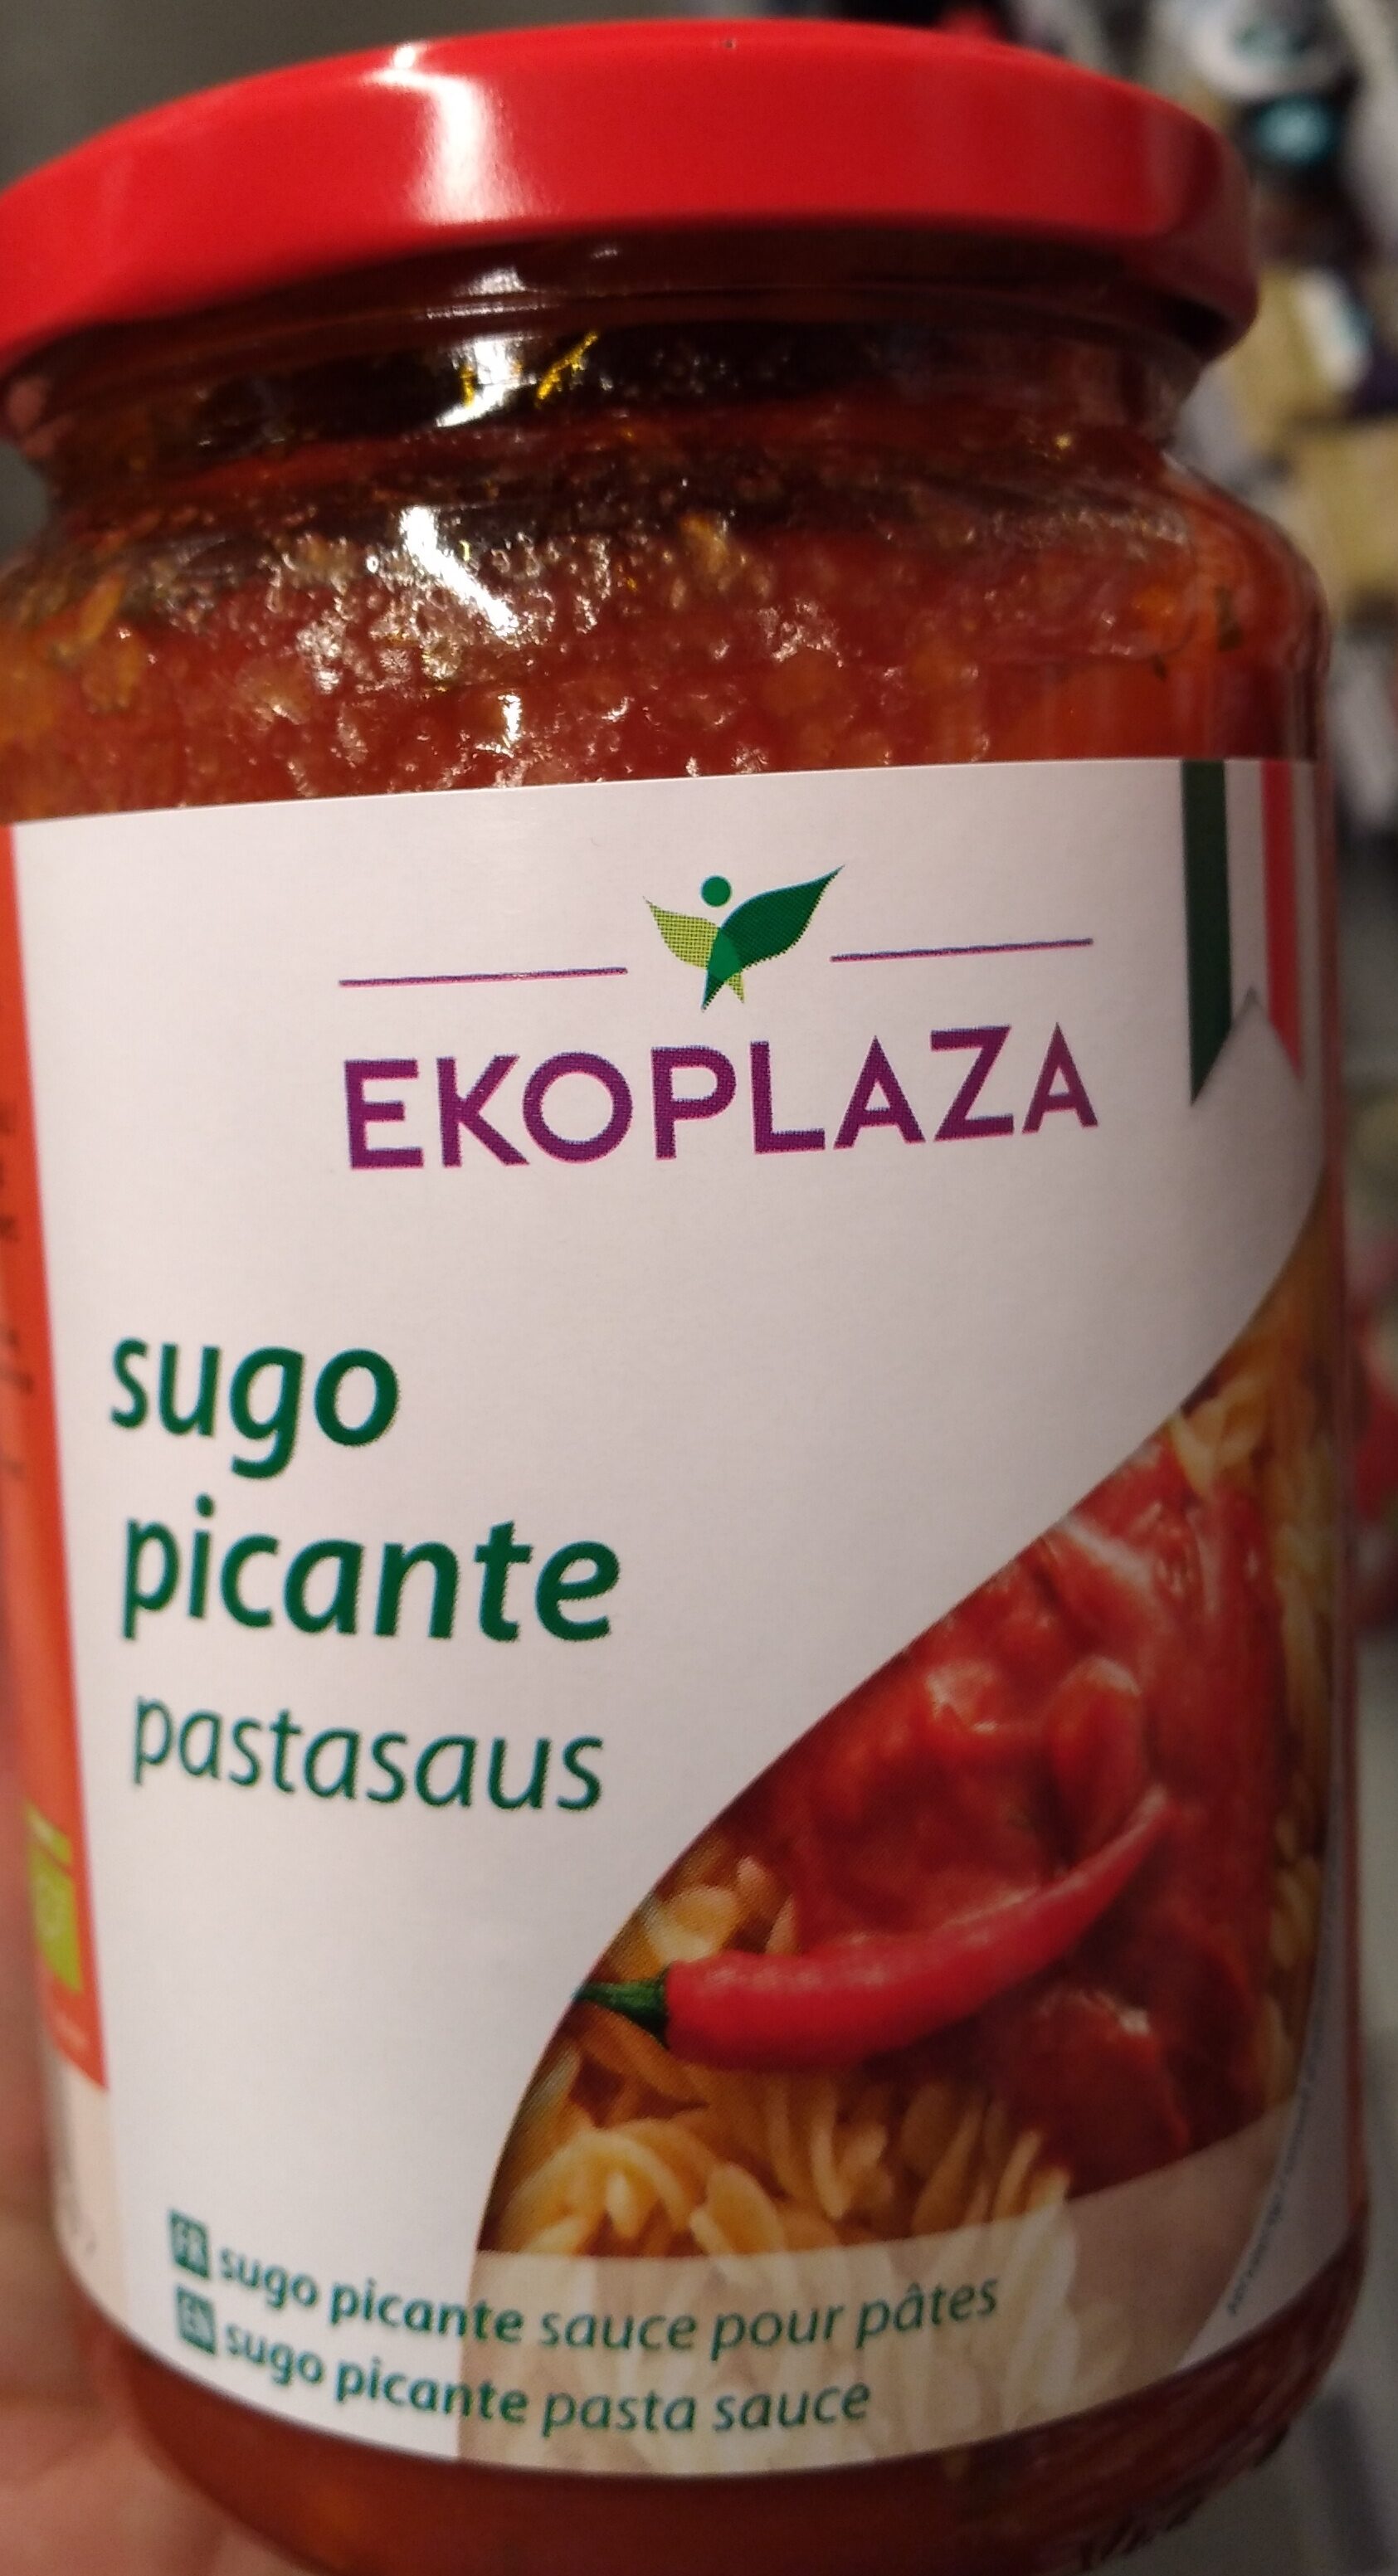 Sugo picante pastasaus - Product